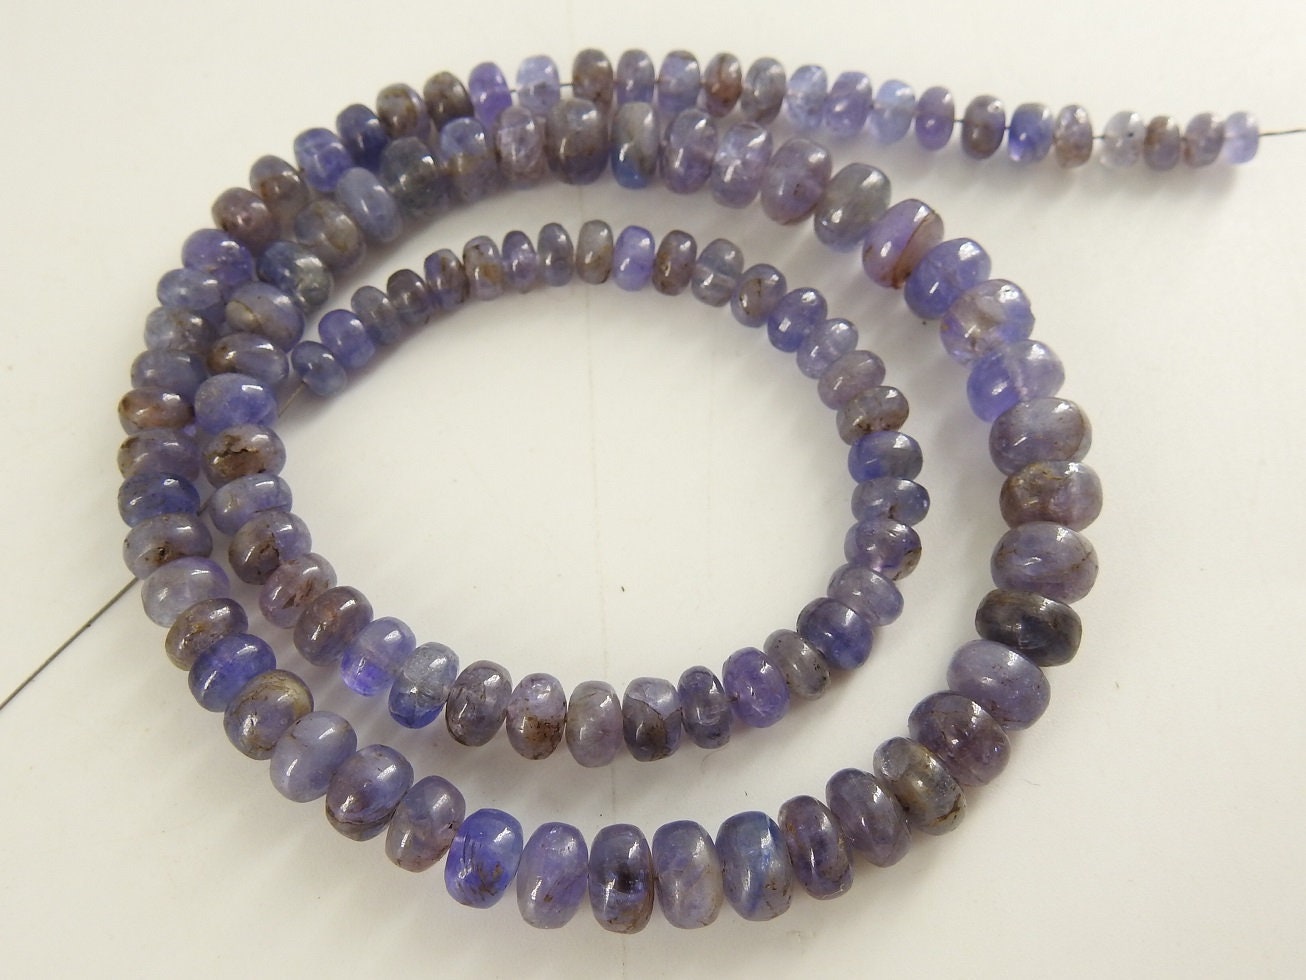 Blue Tanzanite Roundel Bead,Loose Stone,Handmade,Necklace,For Making Jewelry,Wholesaler,Supplies B8 | Save 33% - Rajasthan Living 25